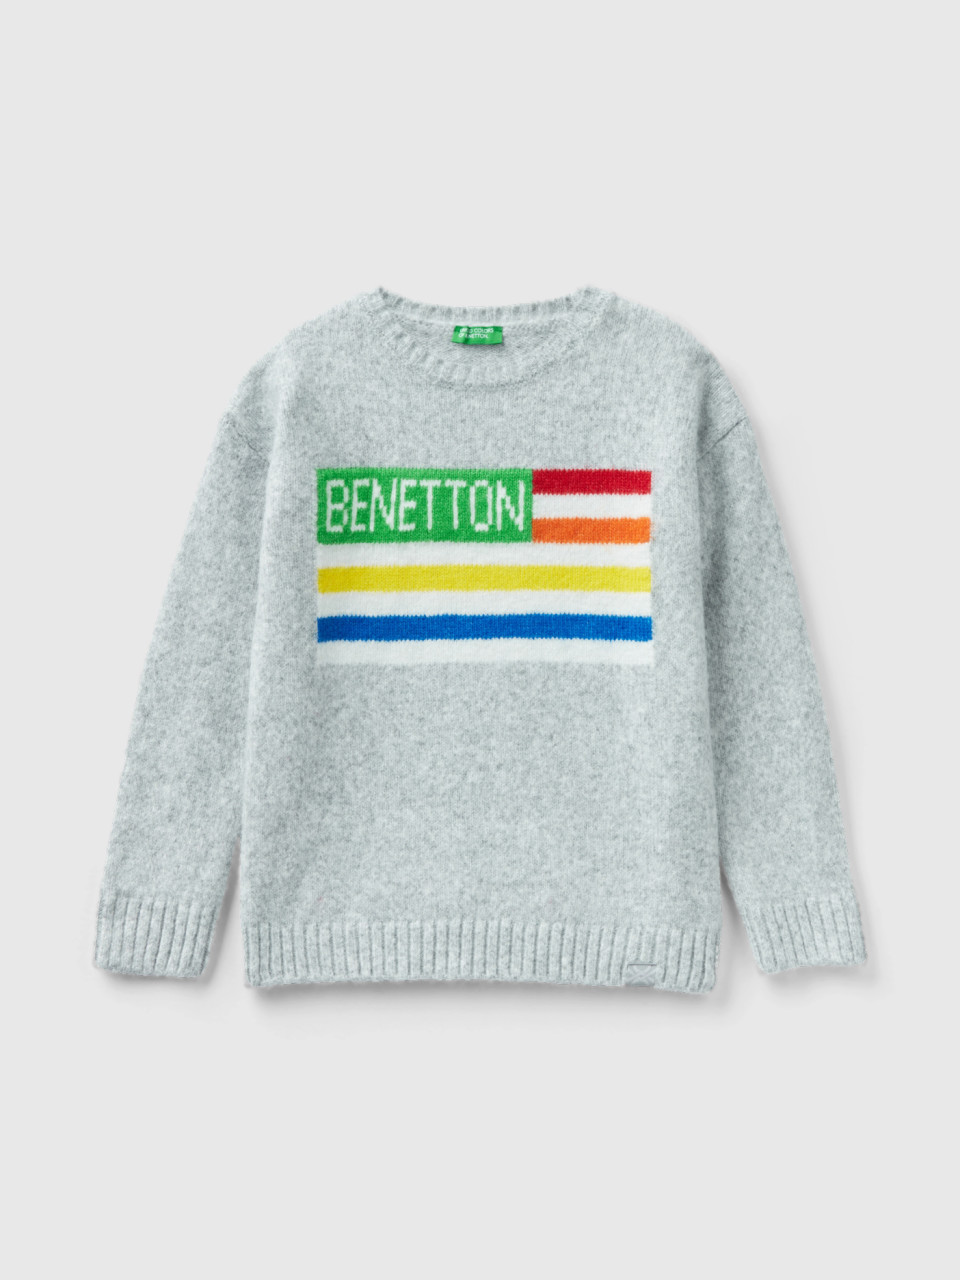 Benetton, Sweater With Flag Inlay, Light Gray, Kids